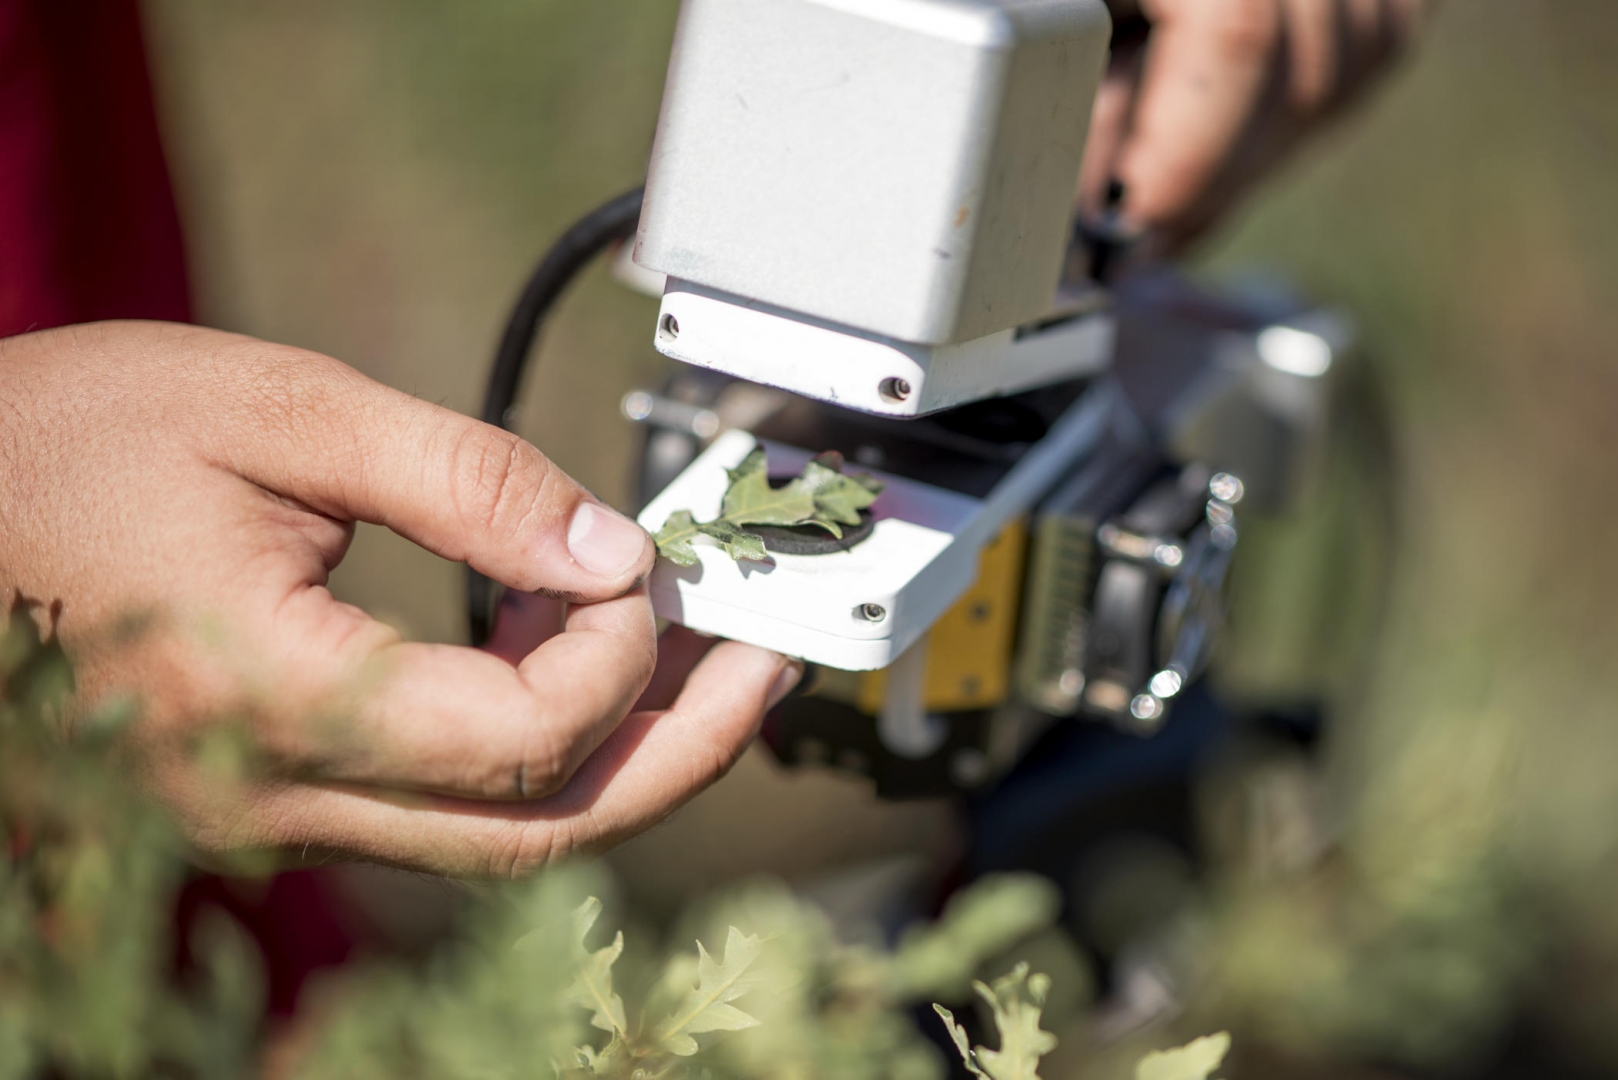 A hand holds an oak leaf between two fingers as it puts it into an infrared gas analyzer to measure photosynthesis.